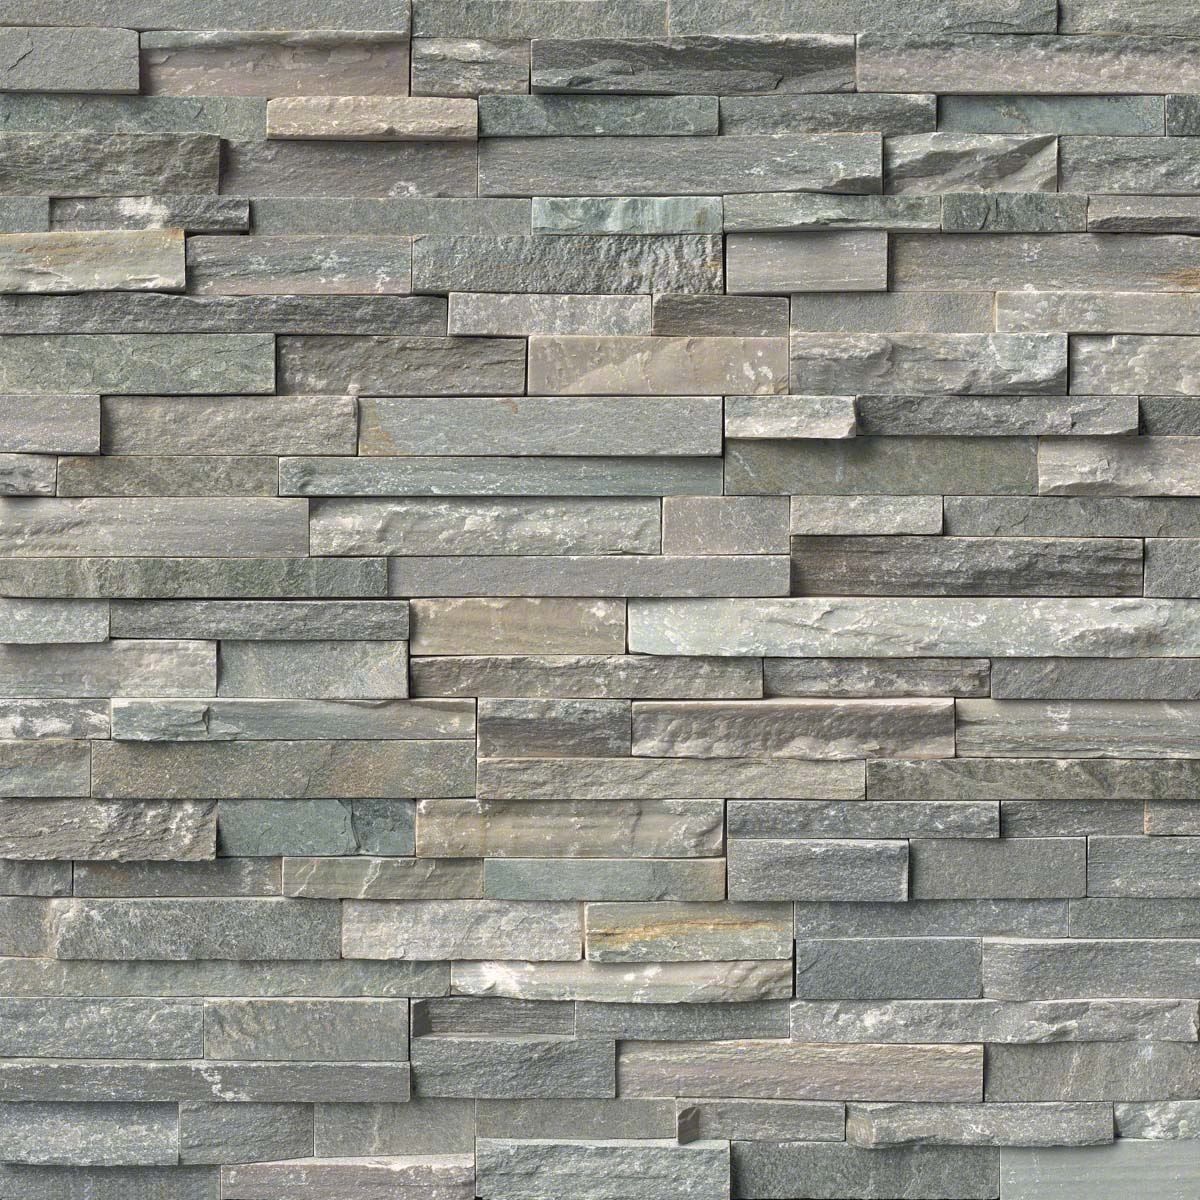 Ocean Stone and Fireplace Unique Hillstone Gray 6×24 Ledgerstone Panels In 2019